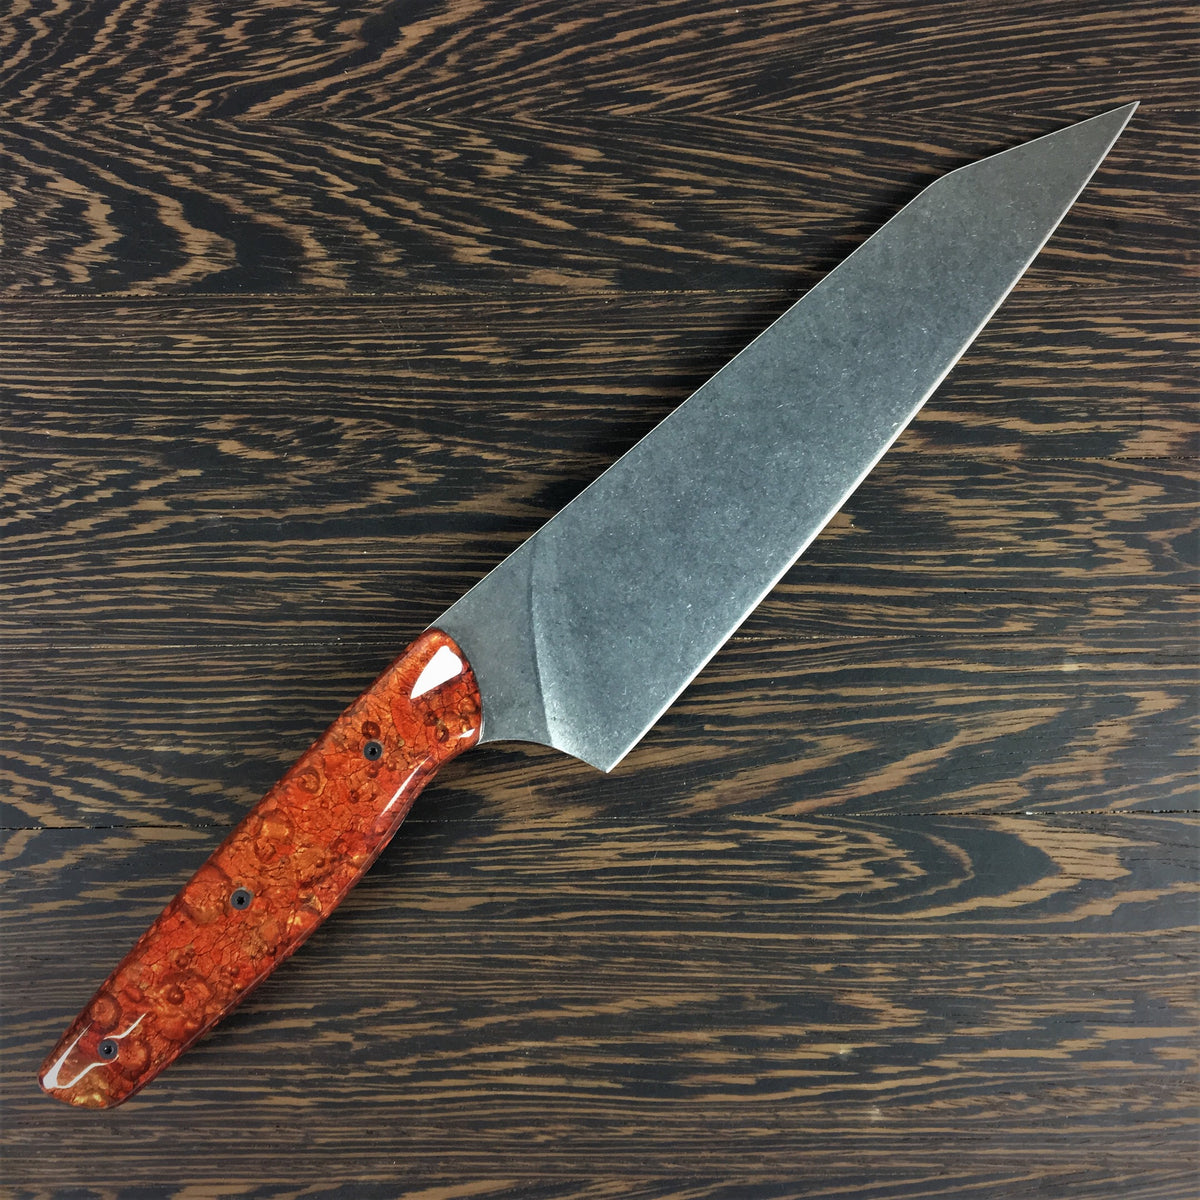 Mars Attacks! - 8” Gyuto Chef Knife S35VN Stainless Steel